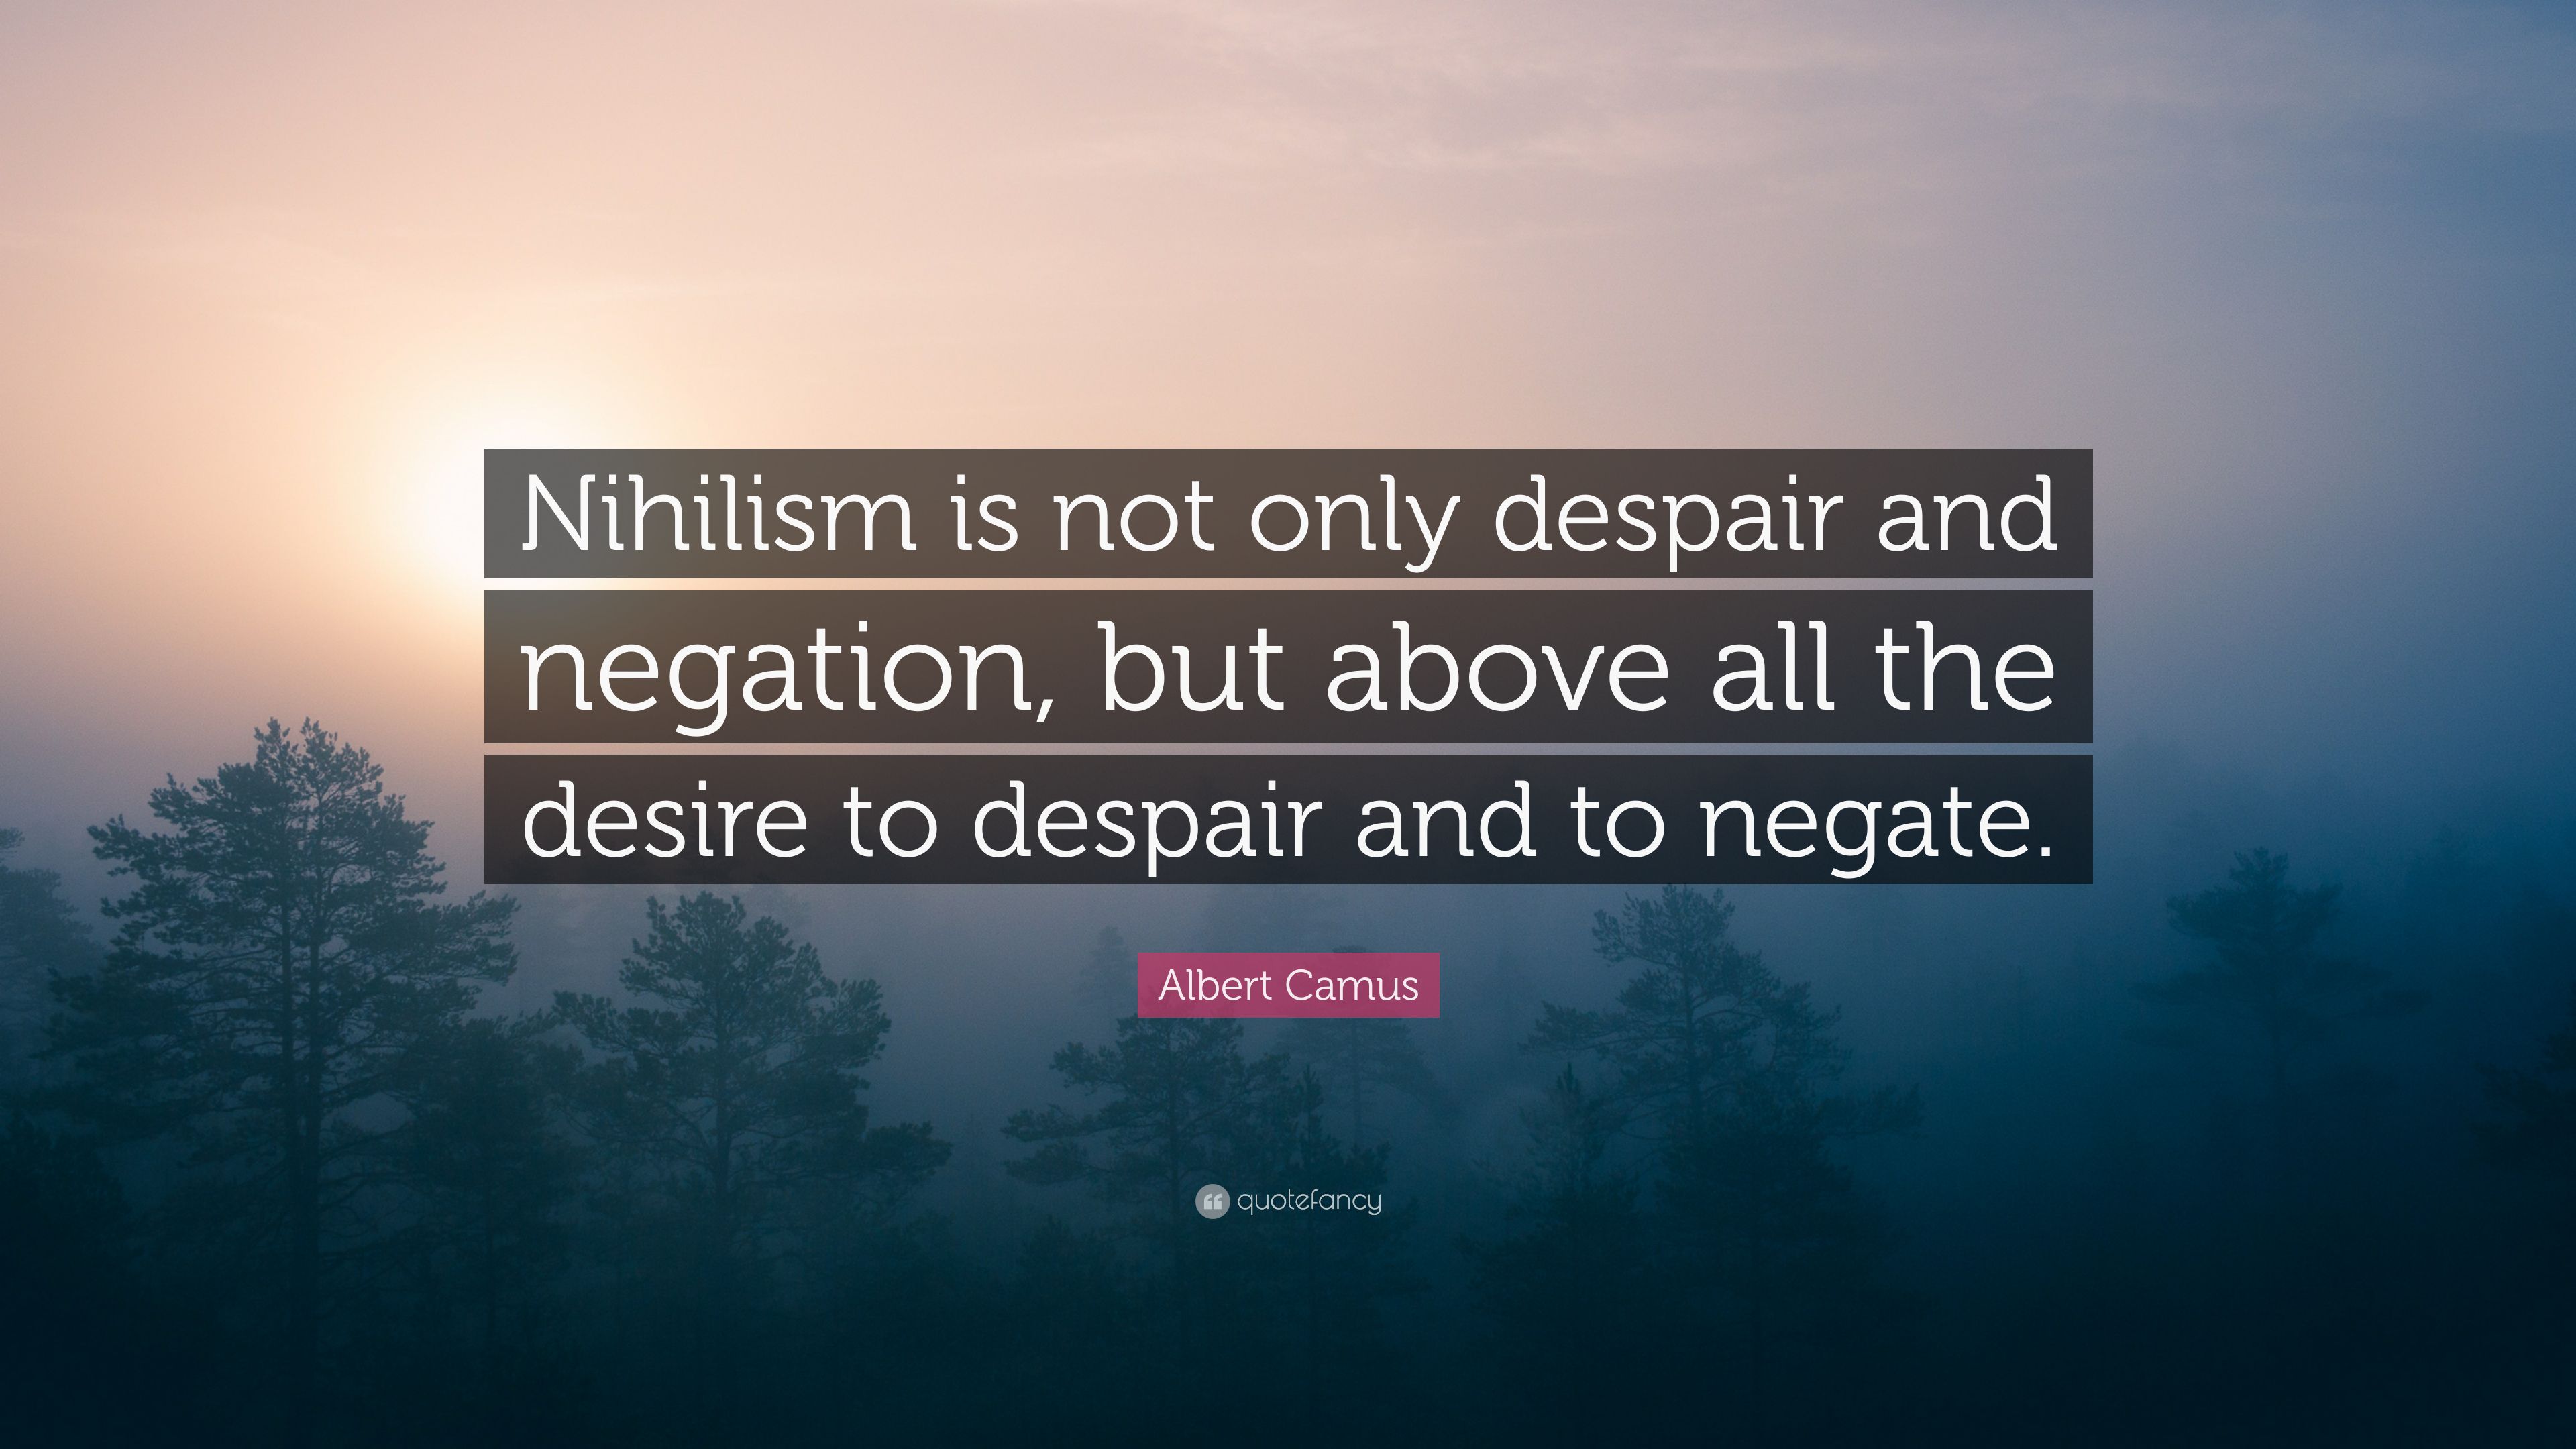 Albert Camus Quote: “Nihilism is not only despair and negation, but above all the desire to despair and to negate.” (12 wallpaper)